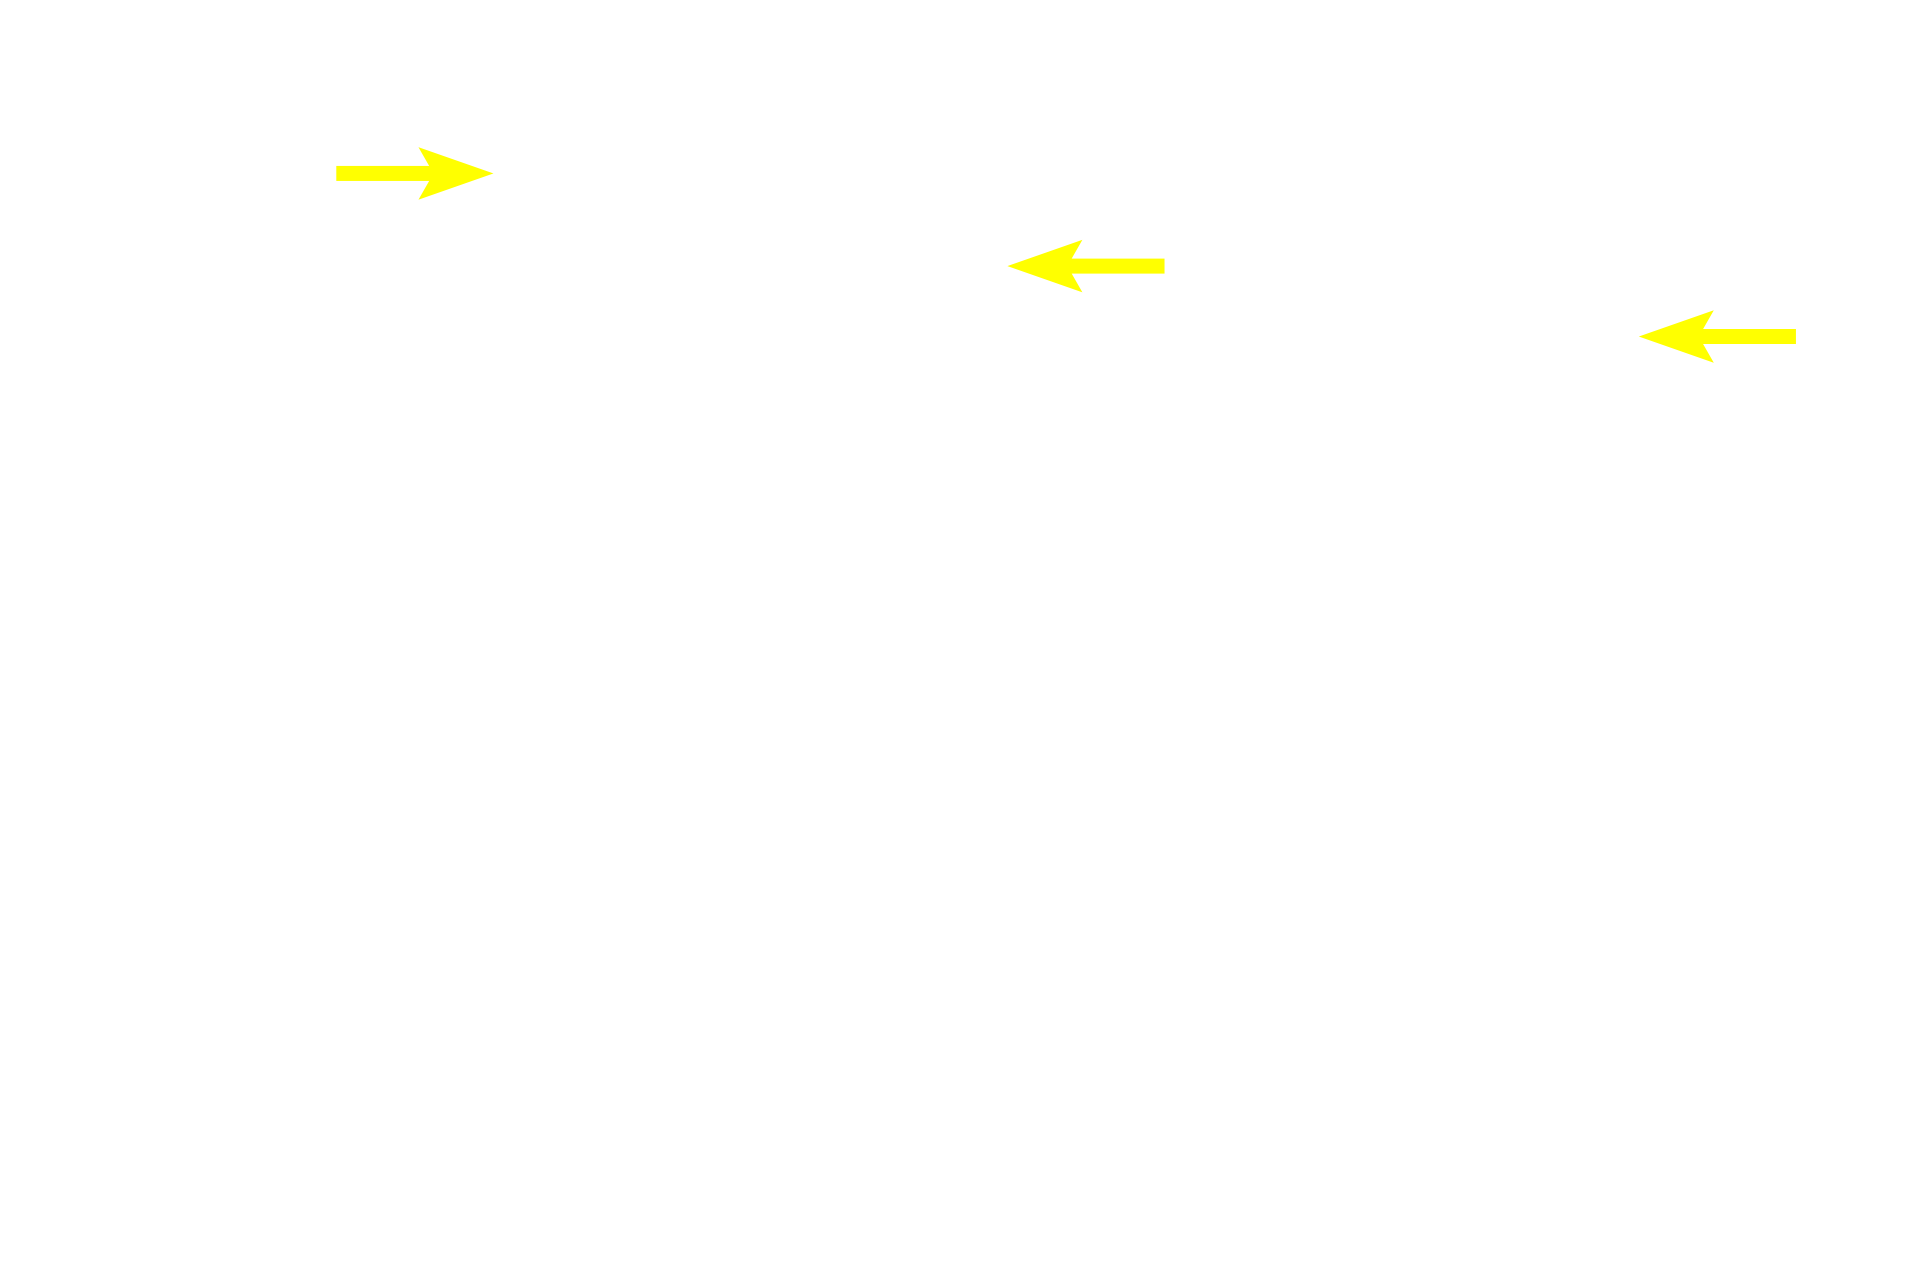  - Squamous cells <p>Stratified epithelia have multiple layers and are further classified by the shape of the cells at the surface.  In stratified squamous epithelia, cells flatten as they are pushed from basal to surface layers.  Surface cells are living, with visible nuclei.  A layer of keratin does not form and the epithelium remains moist.  Esophagus  400x</p>
